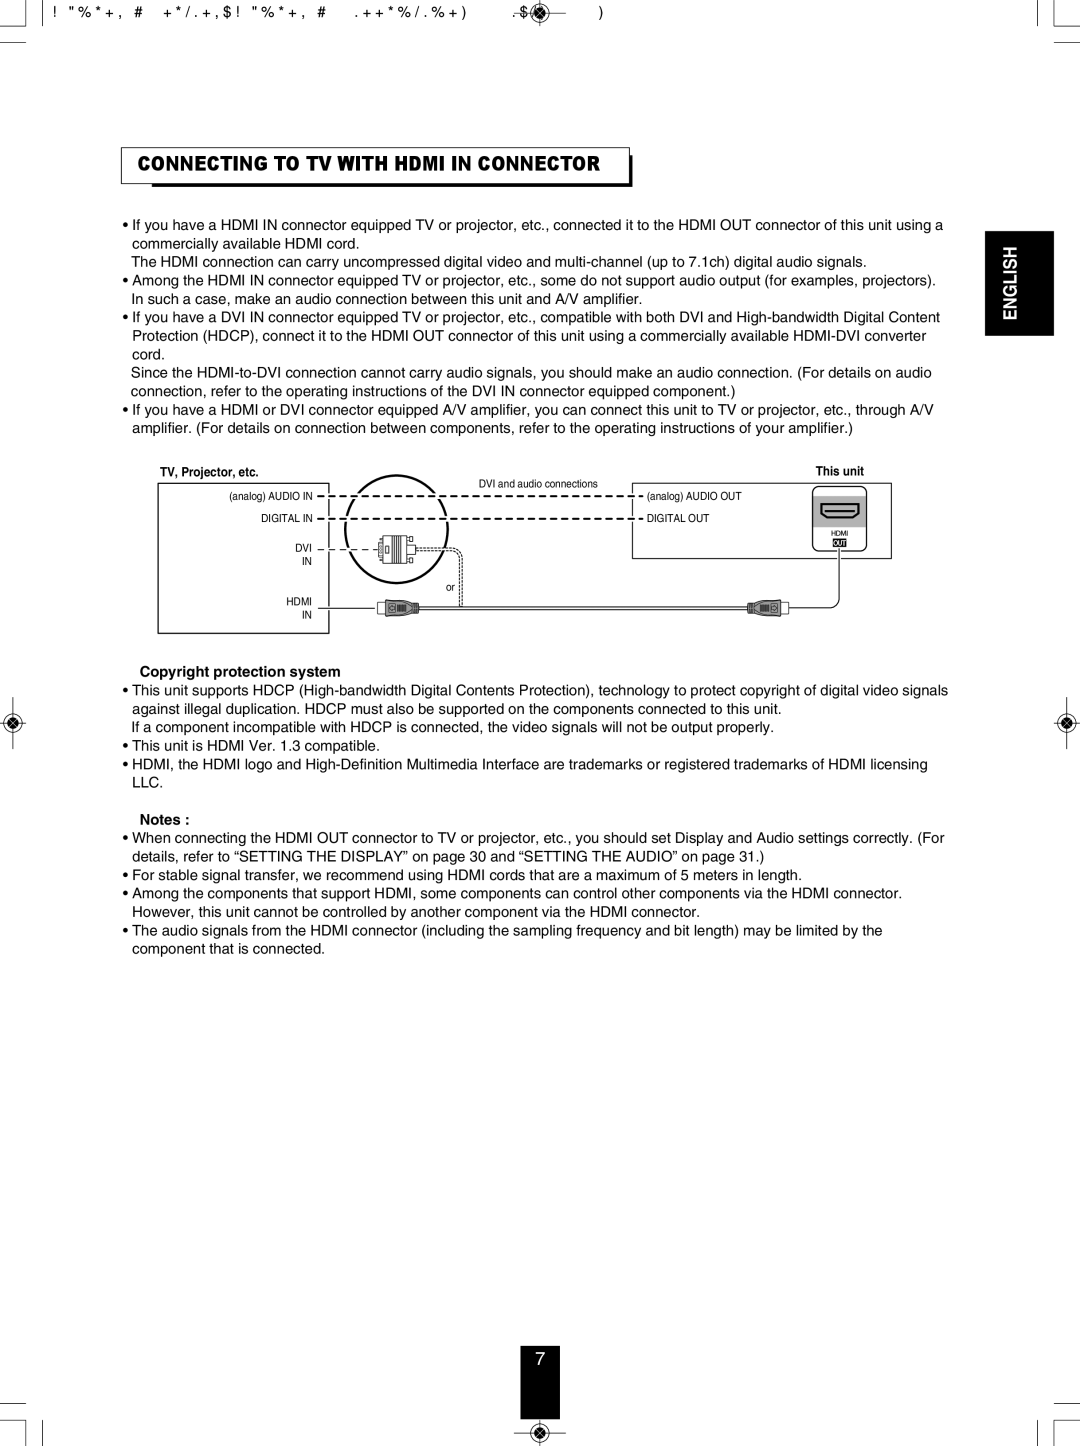 Sherwood BDP-904 manual CONNEcTING to TV with Hdmi in cONNEcTOR, Copyright protection system 